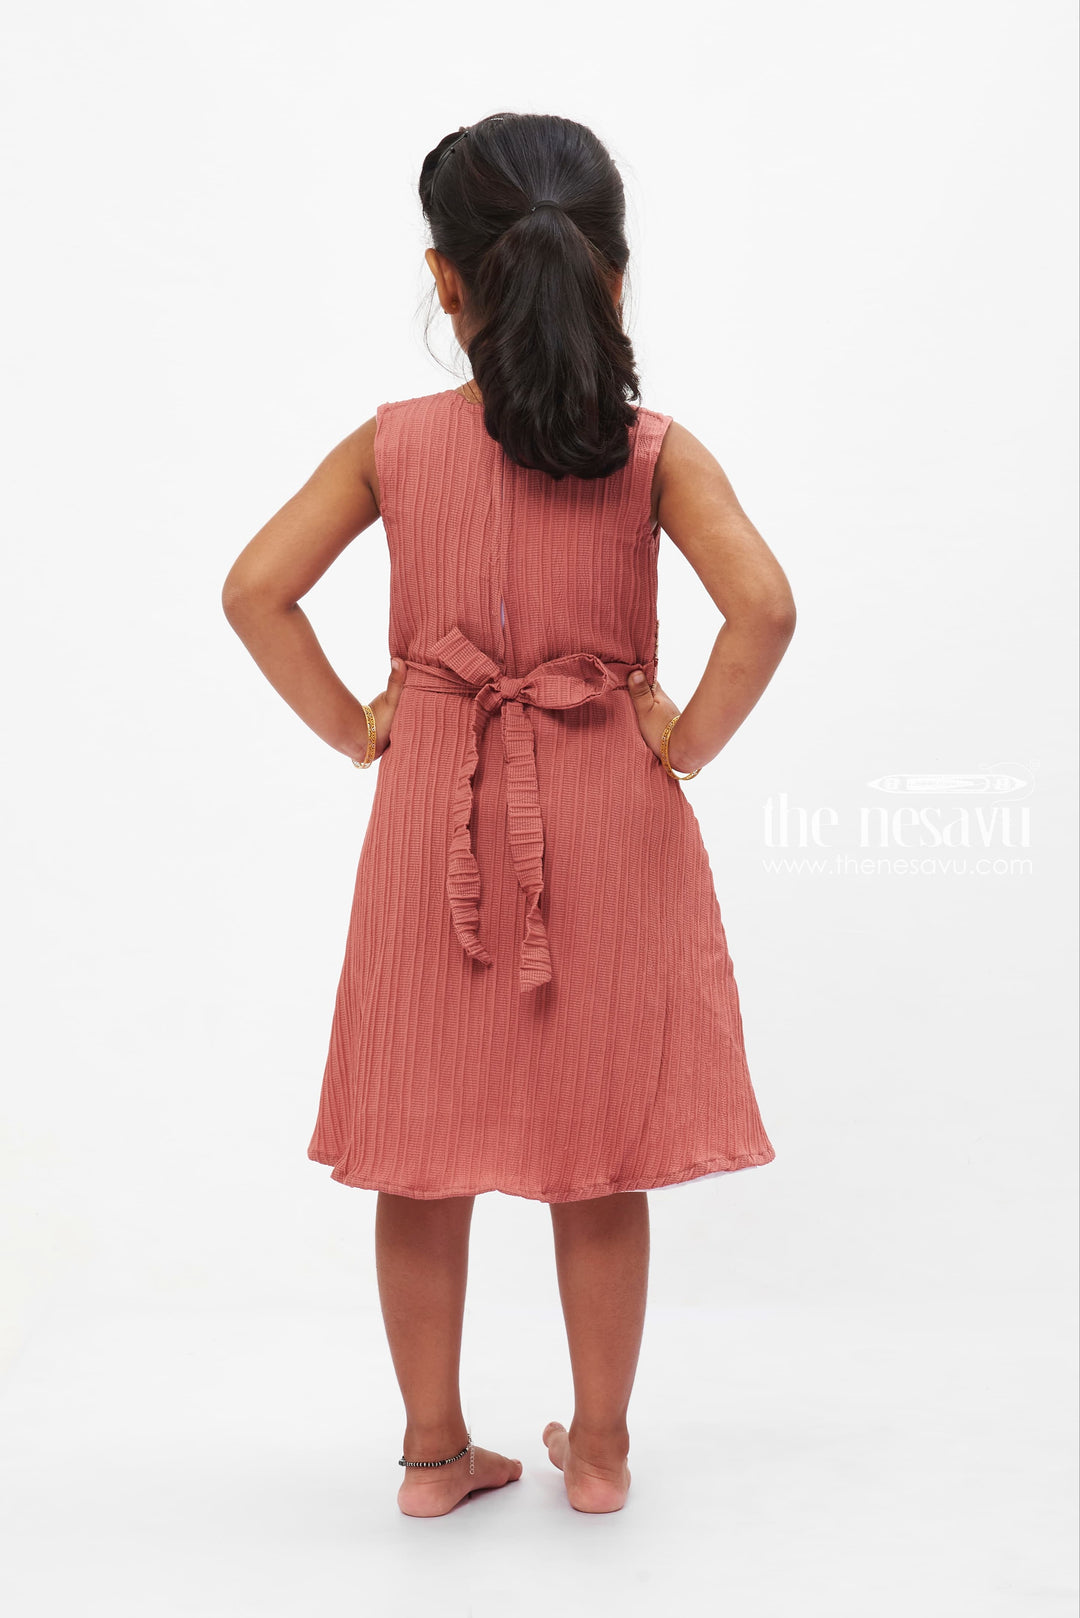 The Nesavu Girls Fancy Frock Coral Charm Pleated Dress: Sleeveless Delight with Floral Brooch for Girls Nesavu Girls' Coral Pleated Dress with Floral Brooch | Vibrant Party Wear | The Nesavu